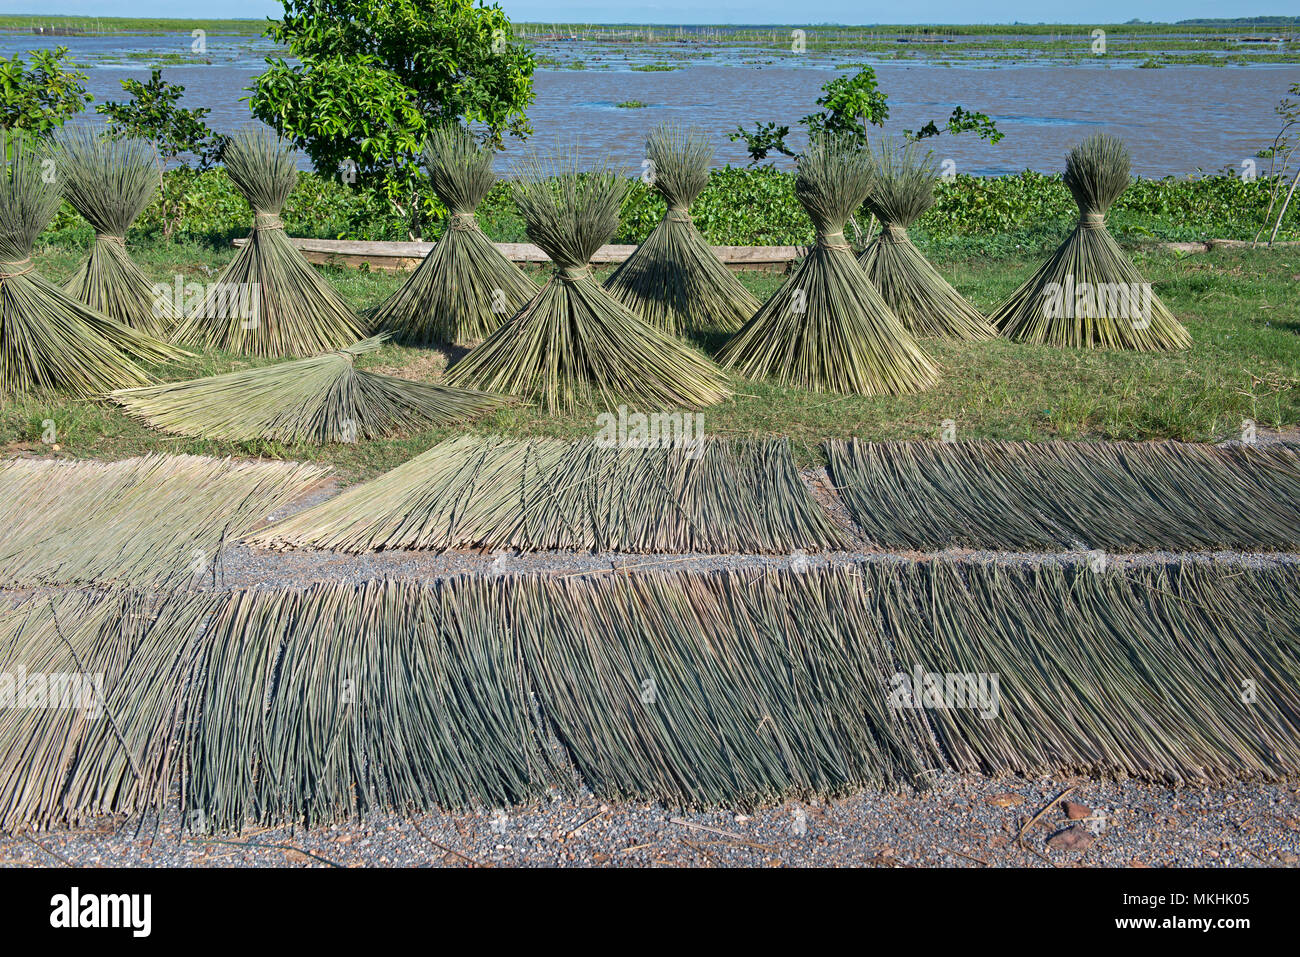 Drying of grey rushes or sedges (Lepirona articulata), Patthalung, Tale Noi, Thailand Stock Photo